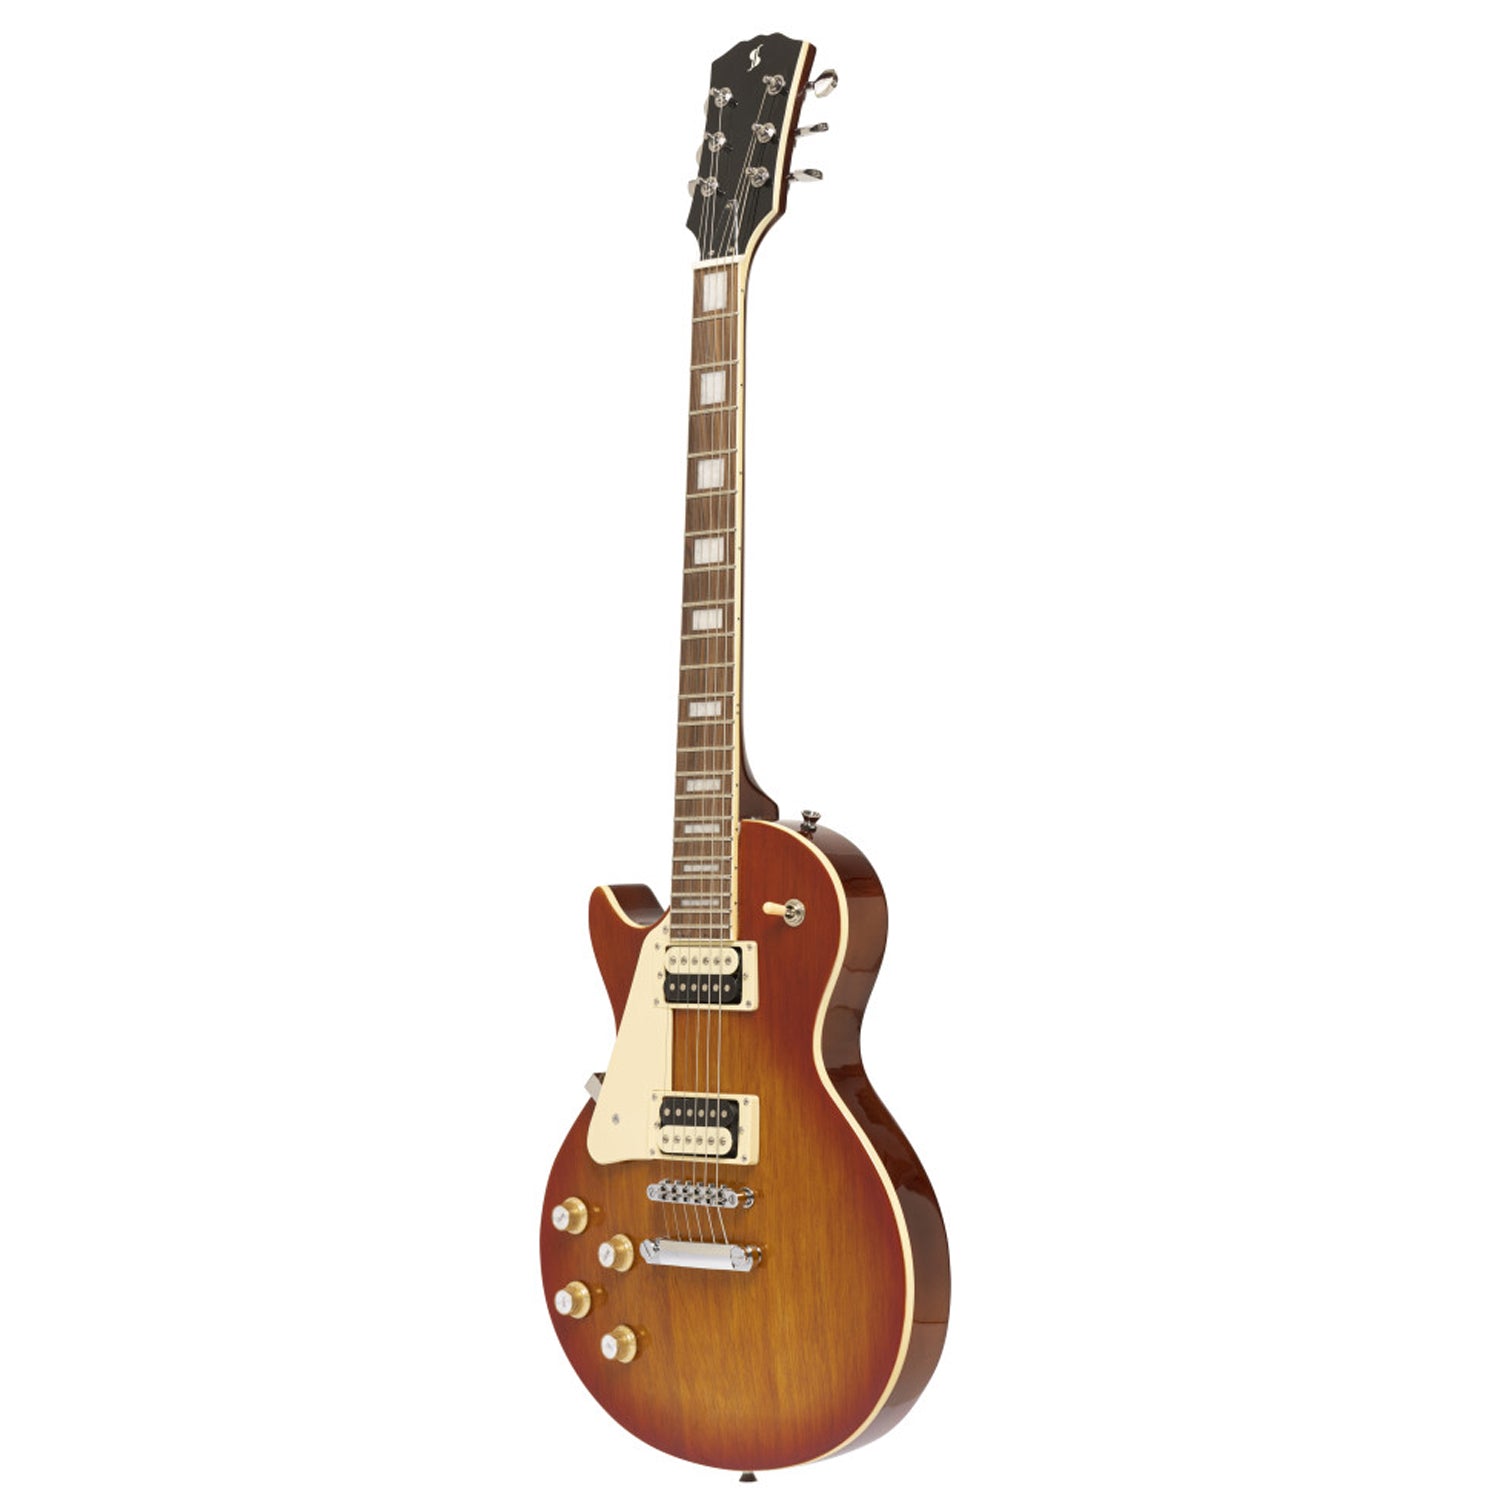 Stagg SEL-STD VSB LH Standard Series Electric Guitar with solid Mahogany body archtop, Left Hand